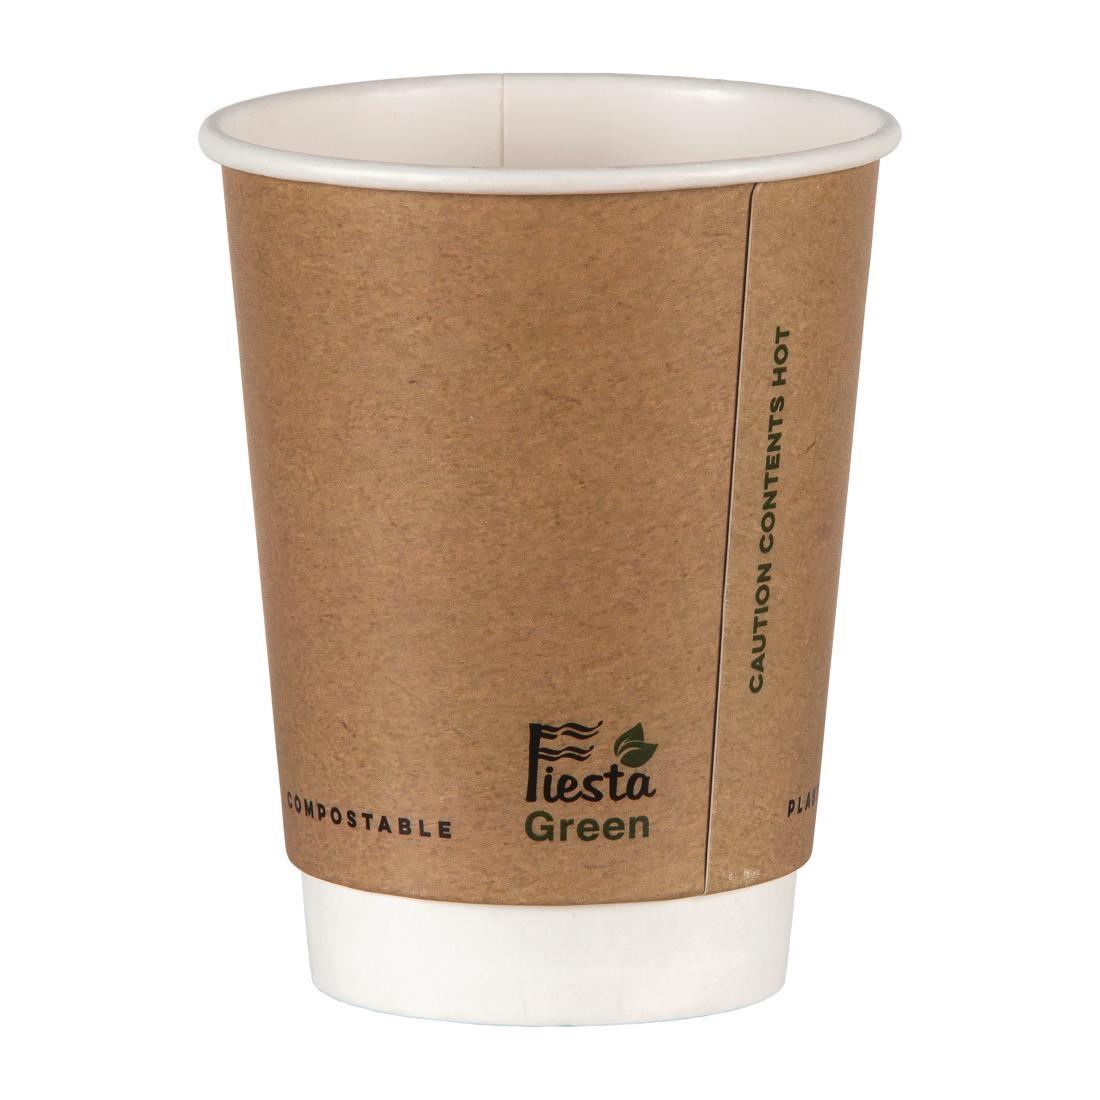 Fiesta Green Plastic-Free Compostable Hot Cups Double Wall 225ml / 8oz x 500 - FB951  - 2